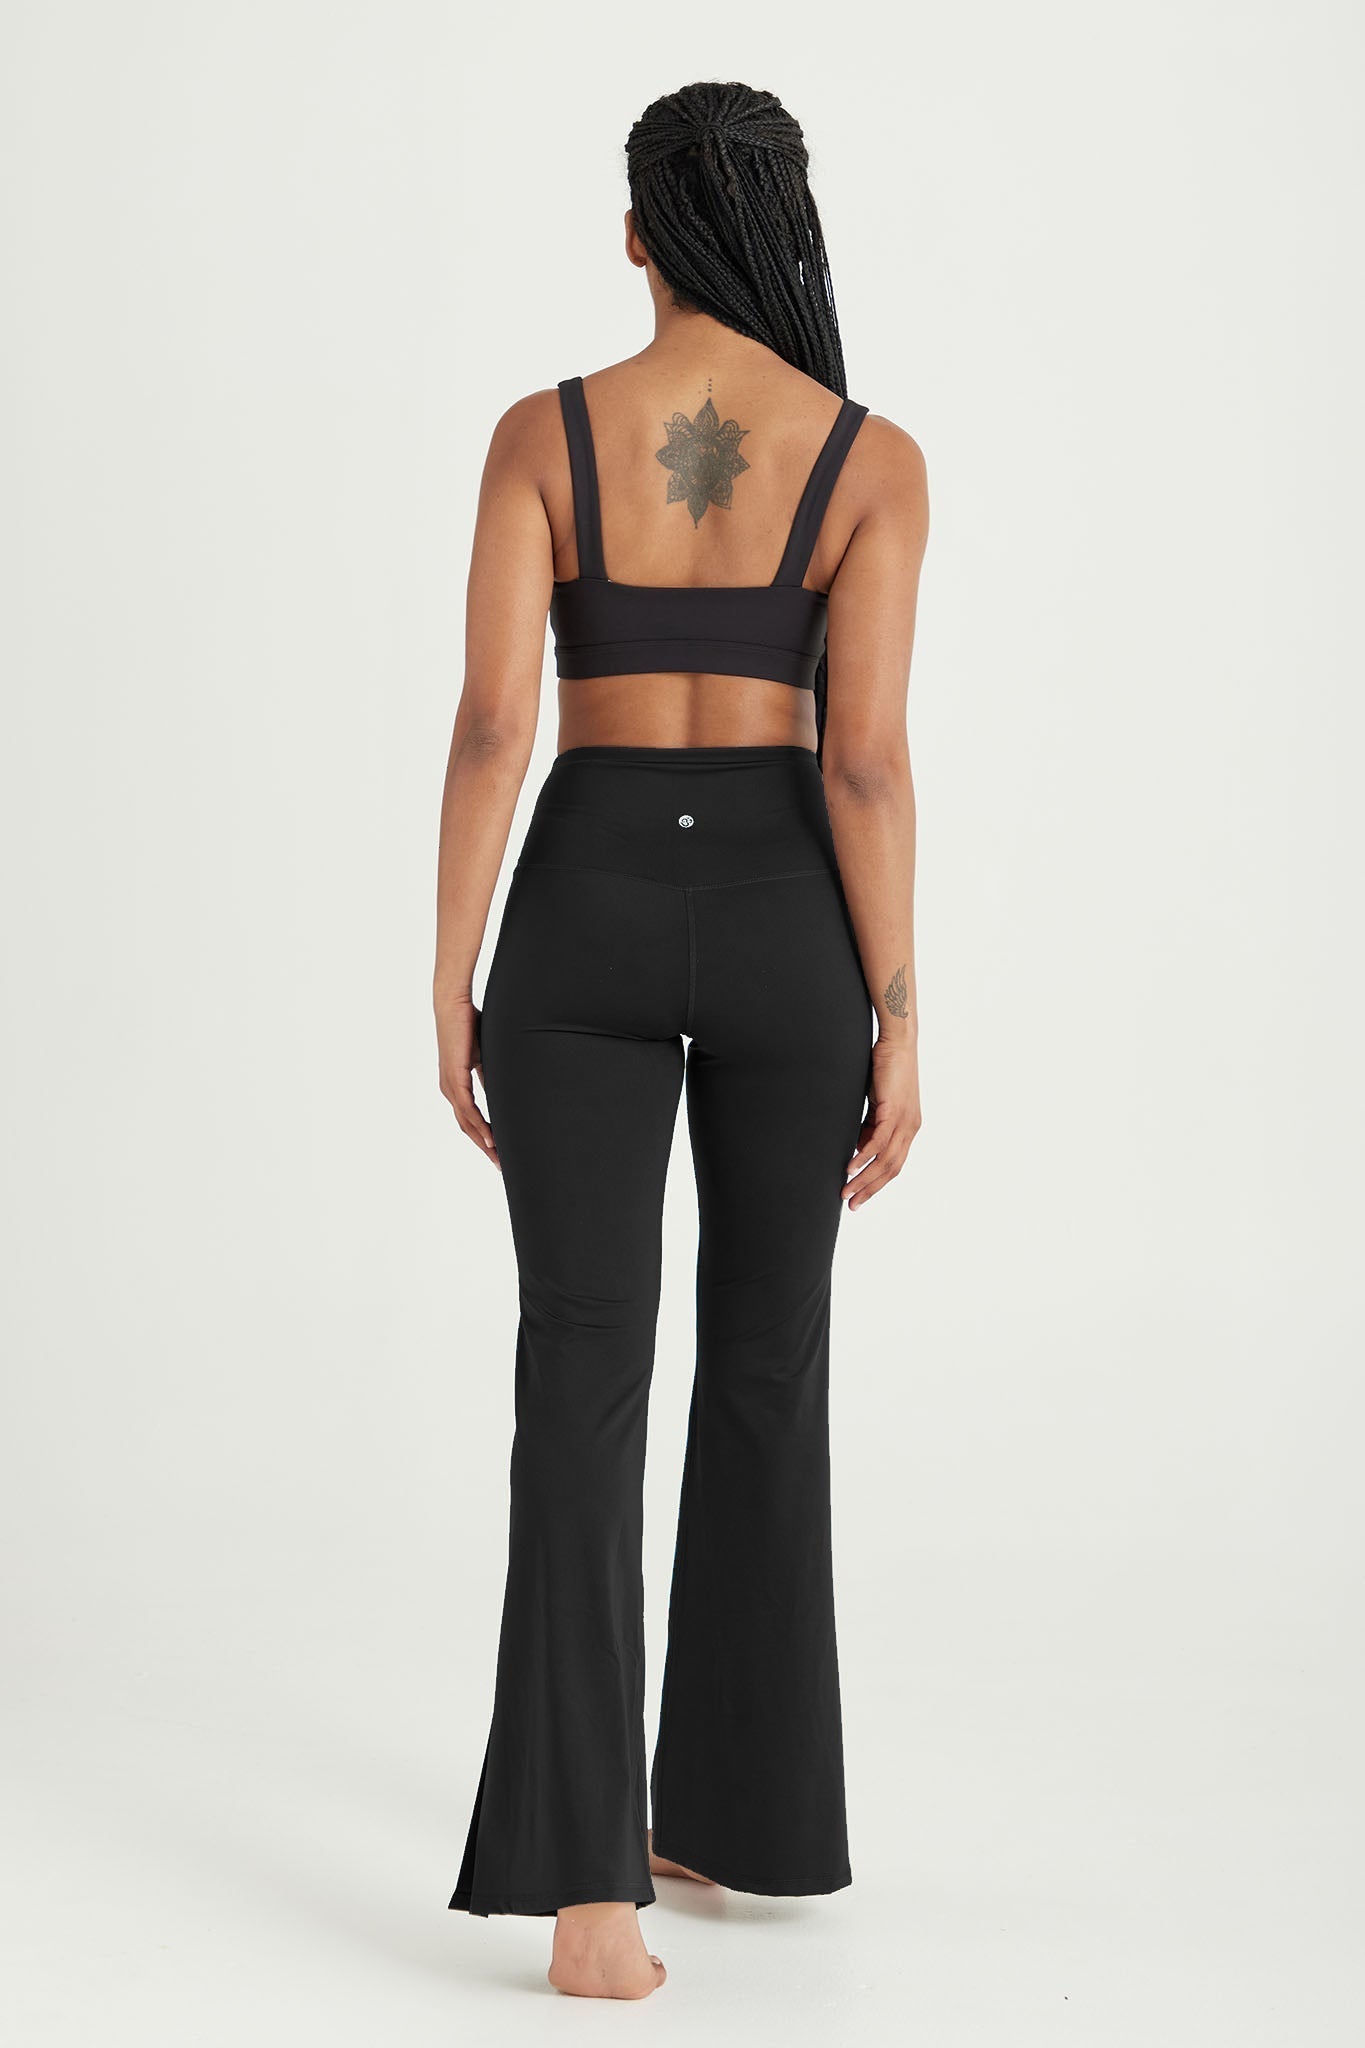 Flare Regular Length Legging - Black, Afterpay Available